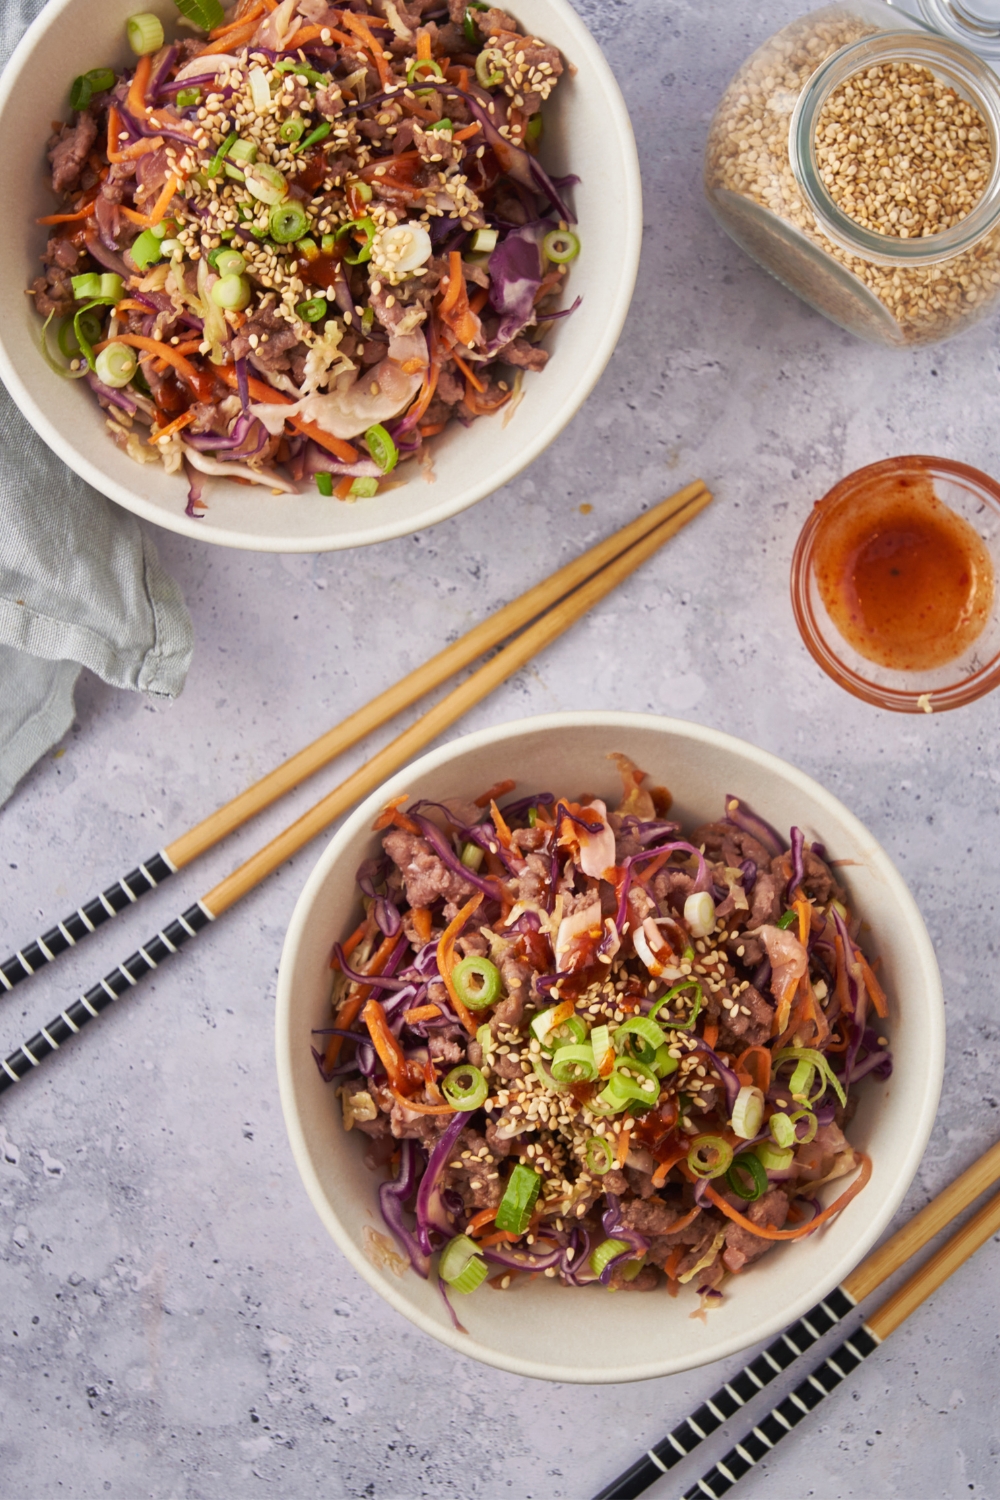 Two bowls with crack slaw and two sets of chop sticks.